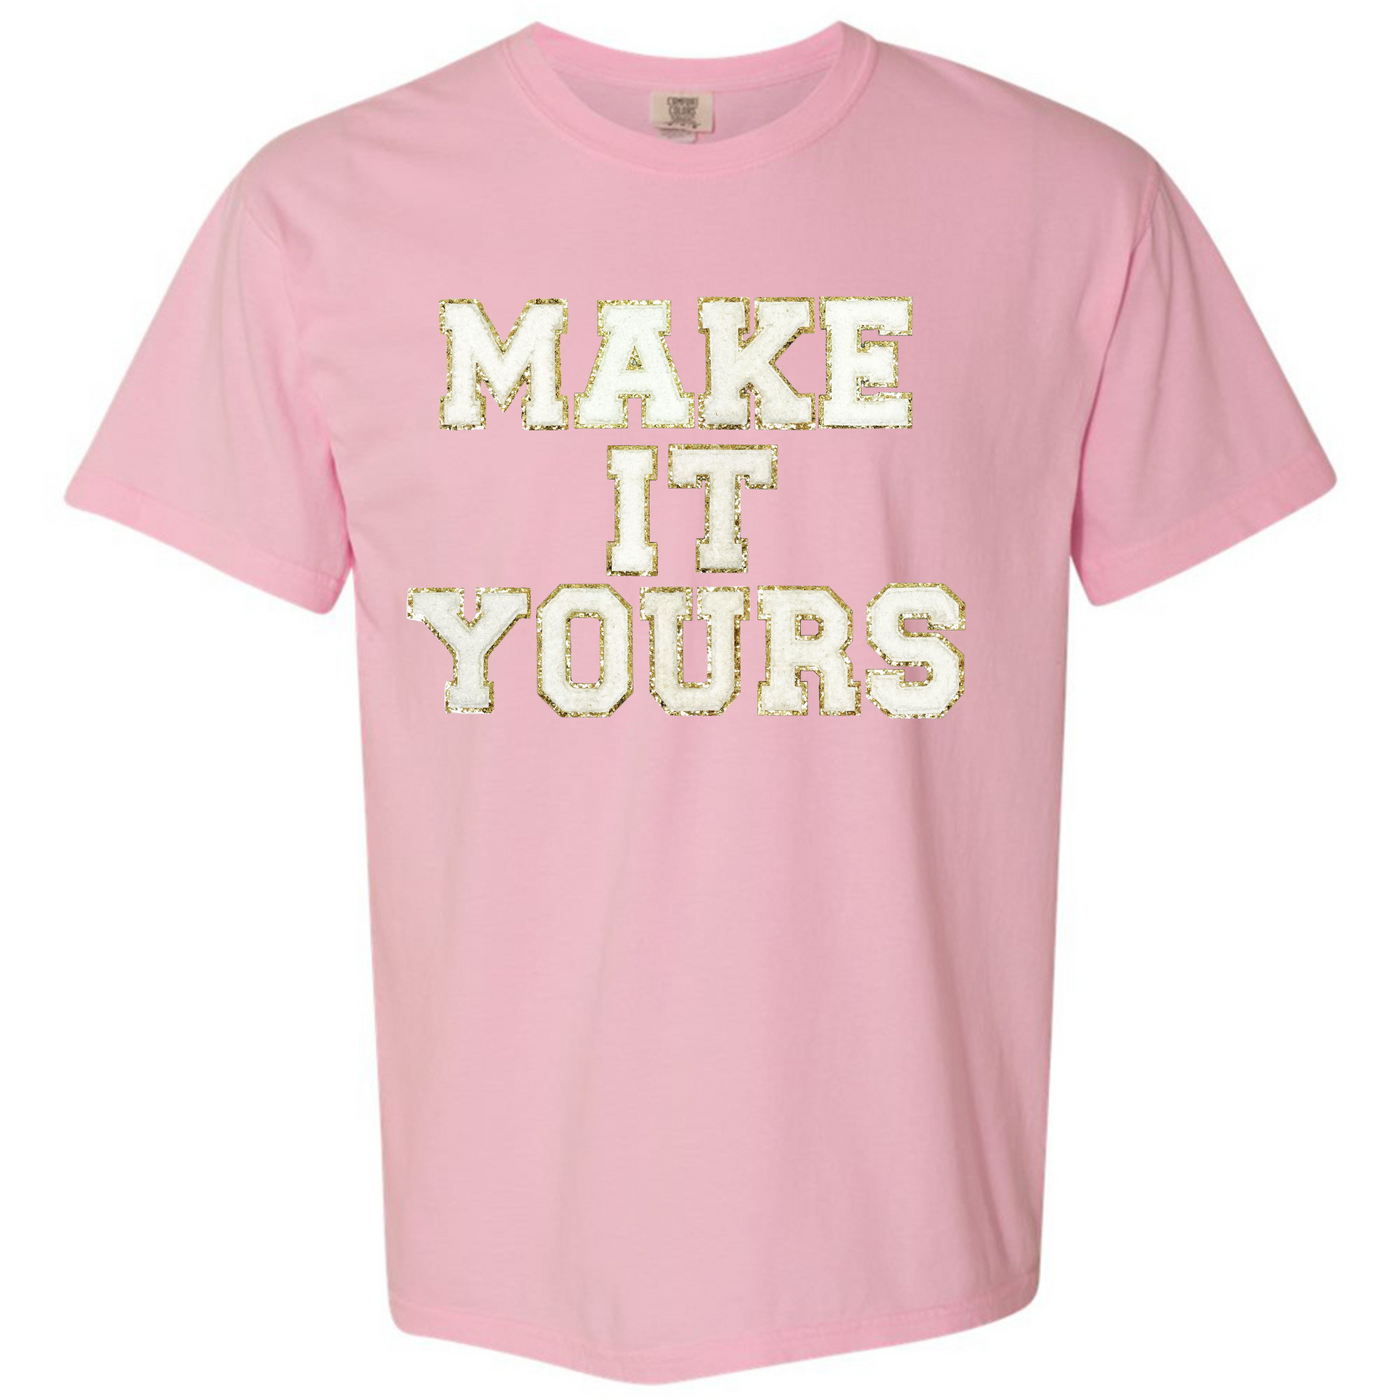 Make It Yours™ Letter Patch T-Shirt